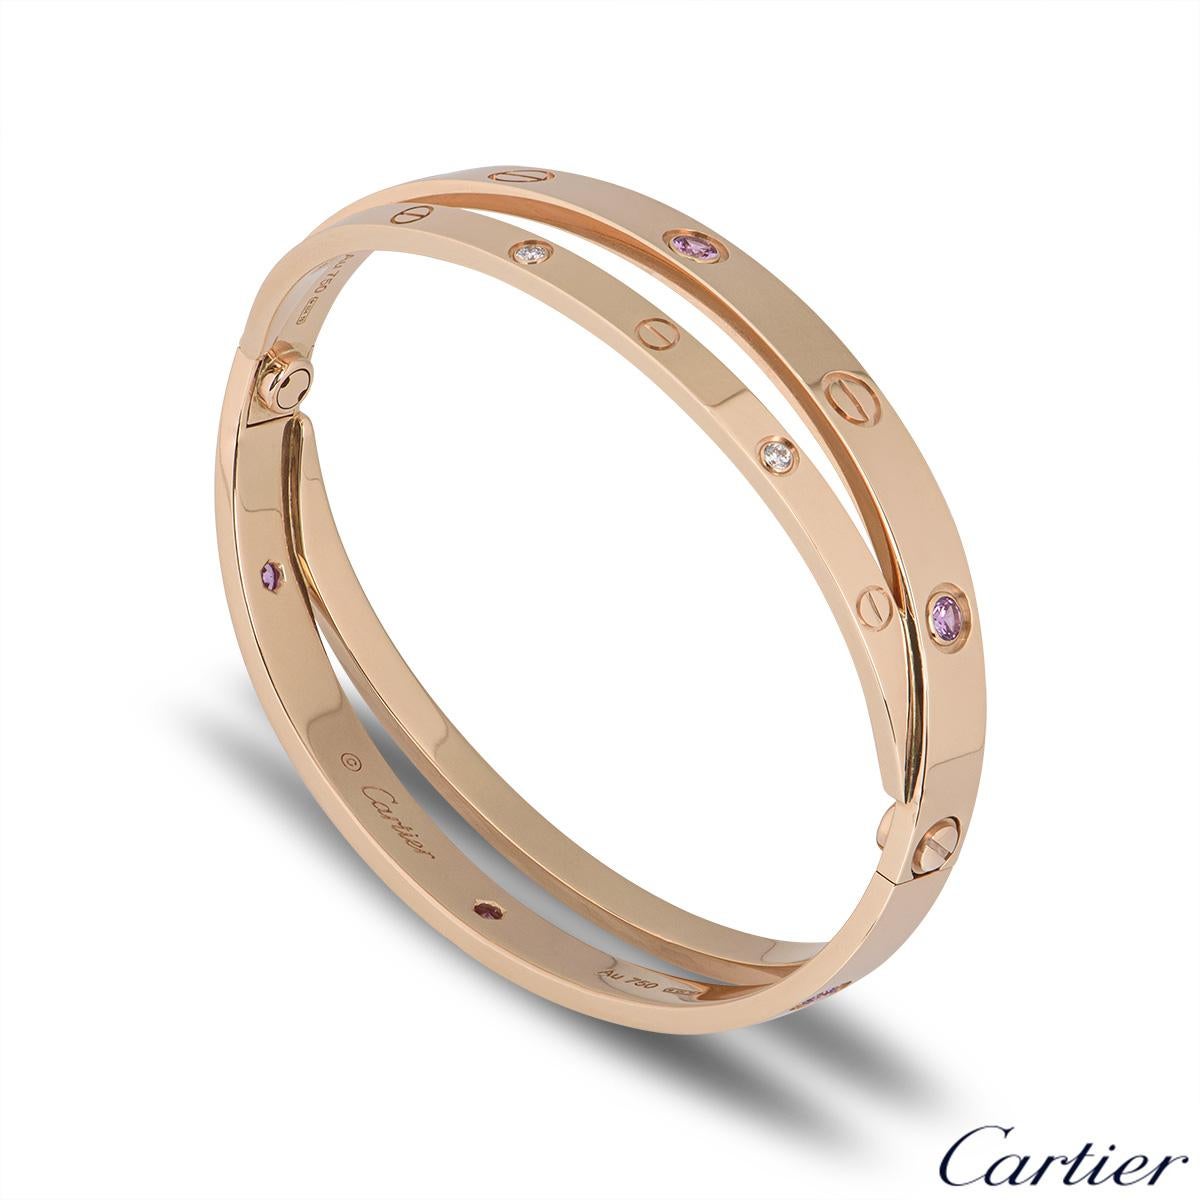 An unworn iconic 18k rose gold half diamond and pink sapphire double Cartier bracelet from the Love collection. The double bangle features the iconic screw motif alternating with 6 round brilliant cut diamonds and 6 pink sapphires displayed around